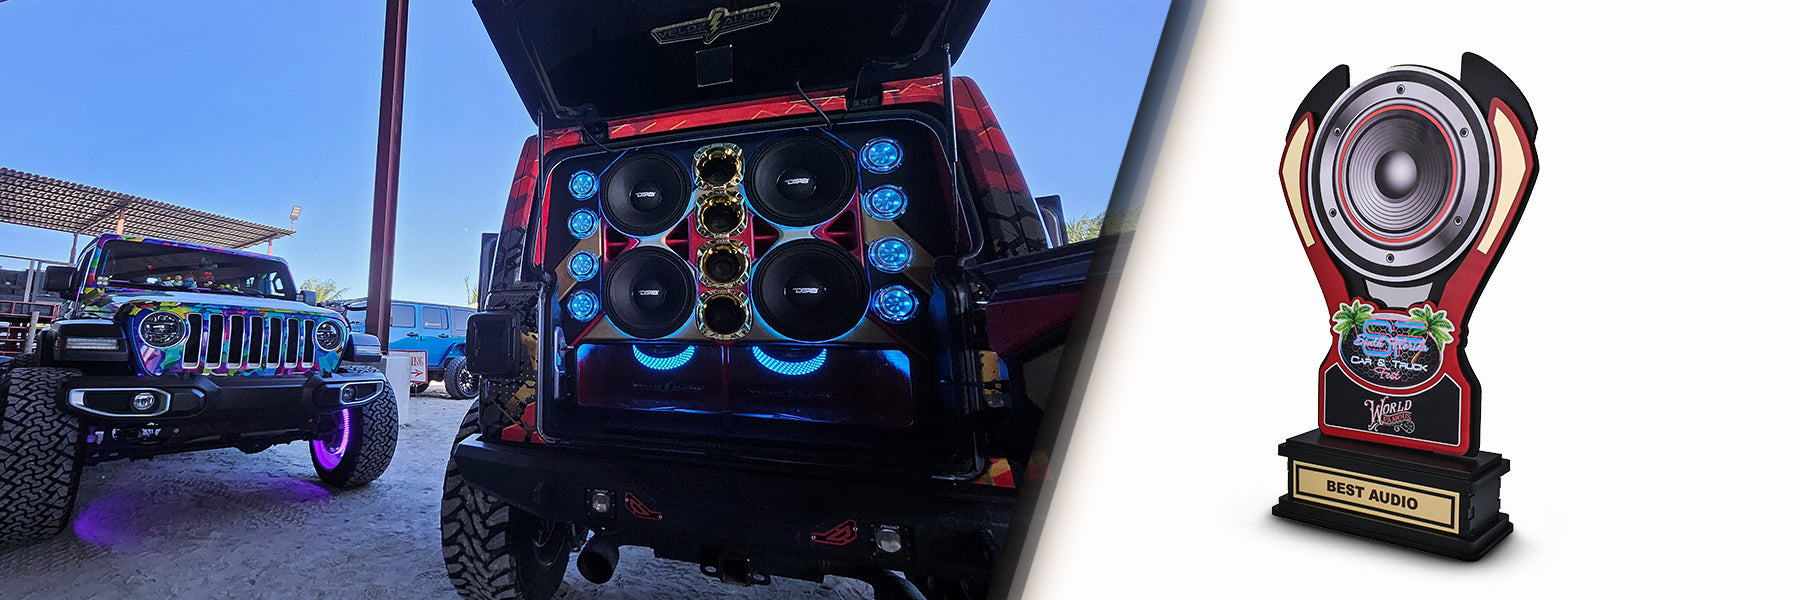 How DS18 Secured The Best Audio Award At This Year’s South Florida Car and Truck Fest